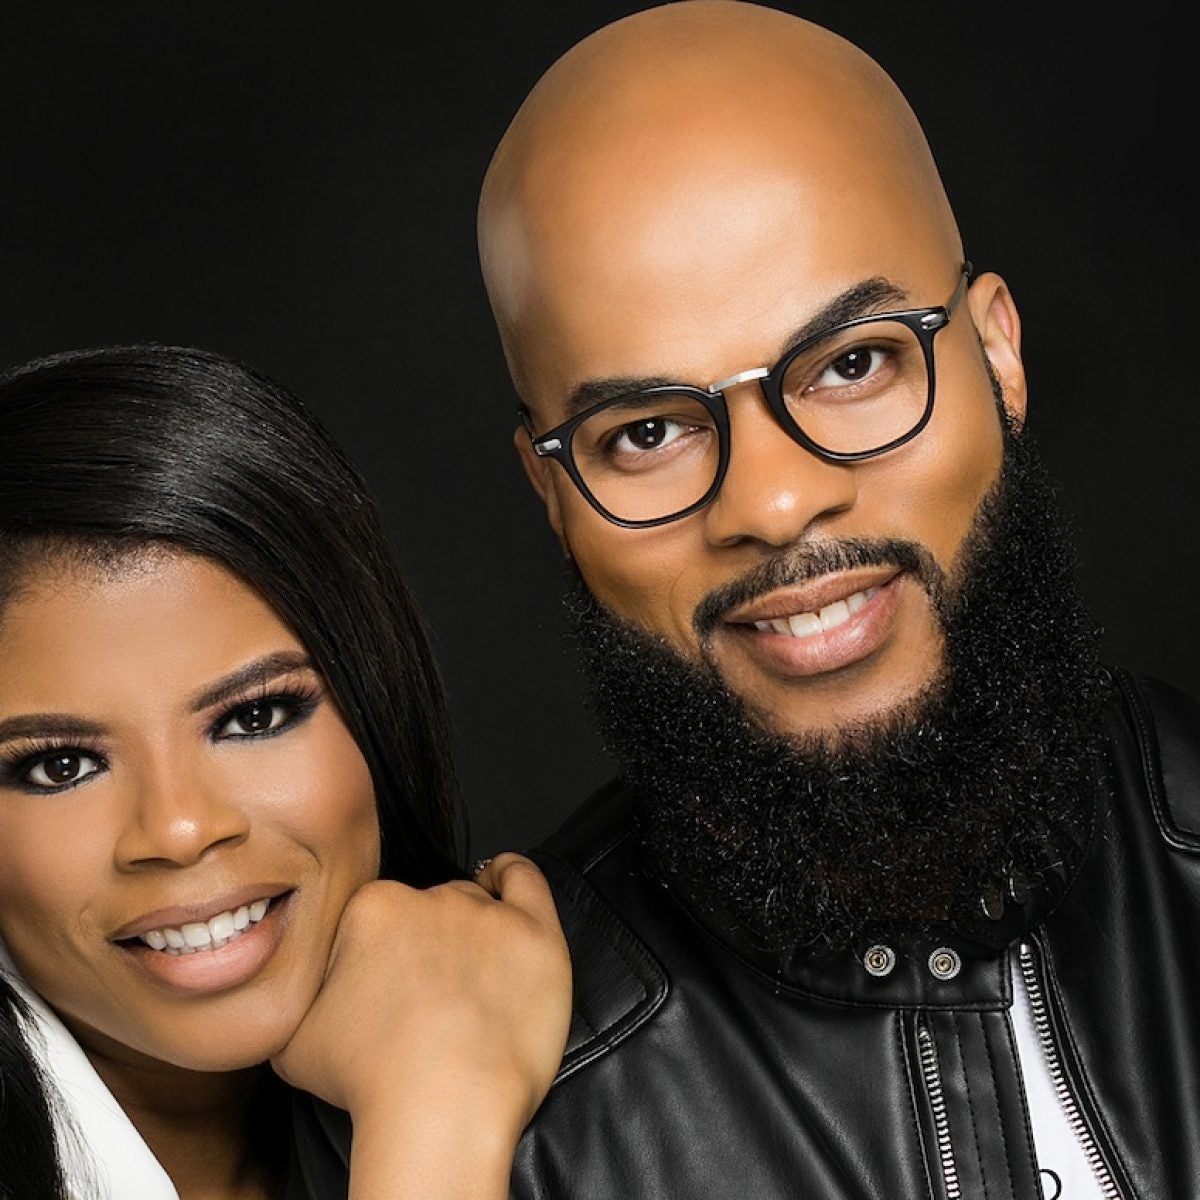 How Gospel Artist J.J. Hairston And Wife Trina Saved Their Marriage, Then Made It Stronger